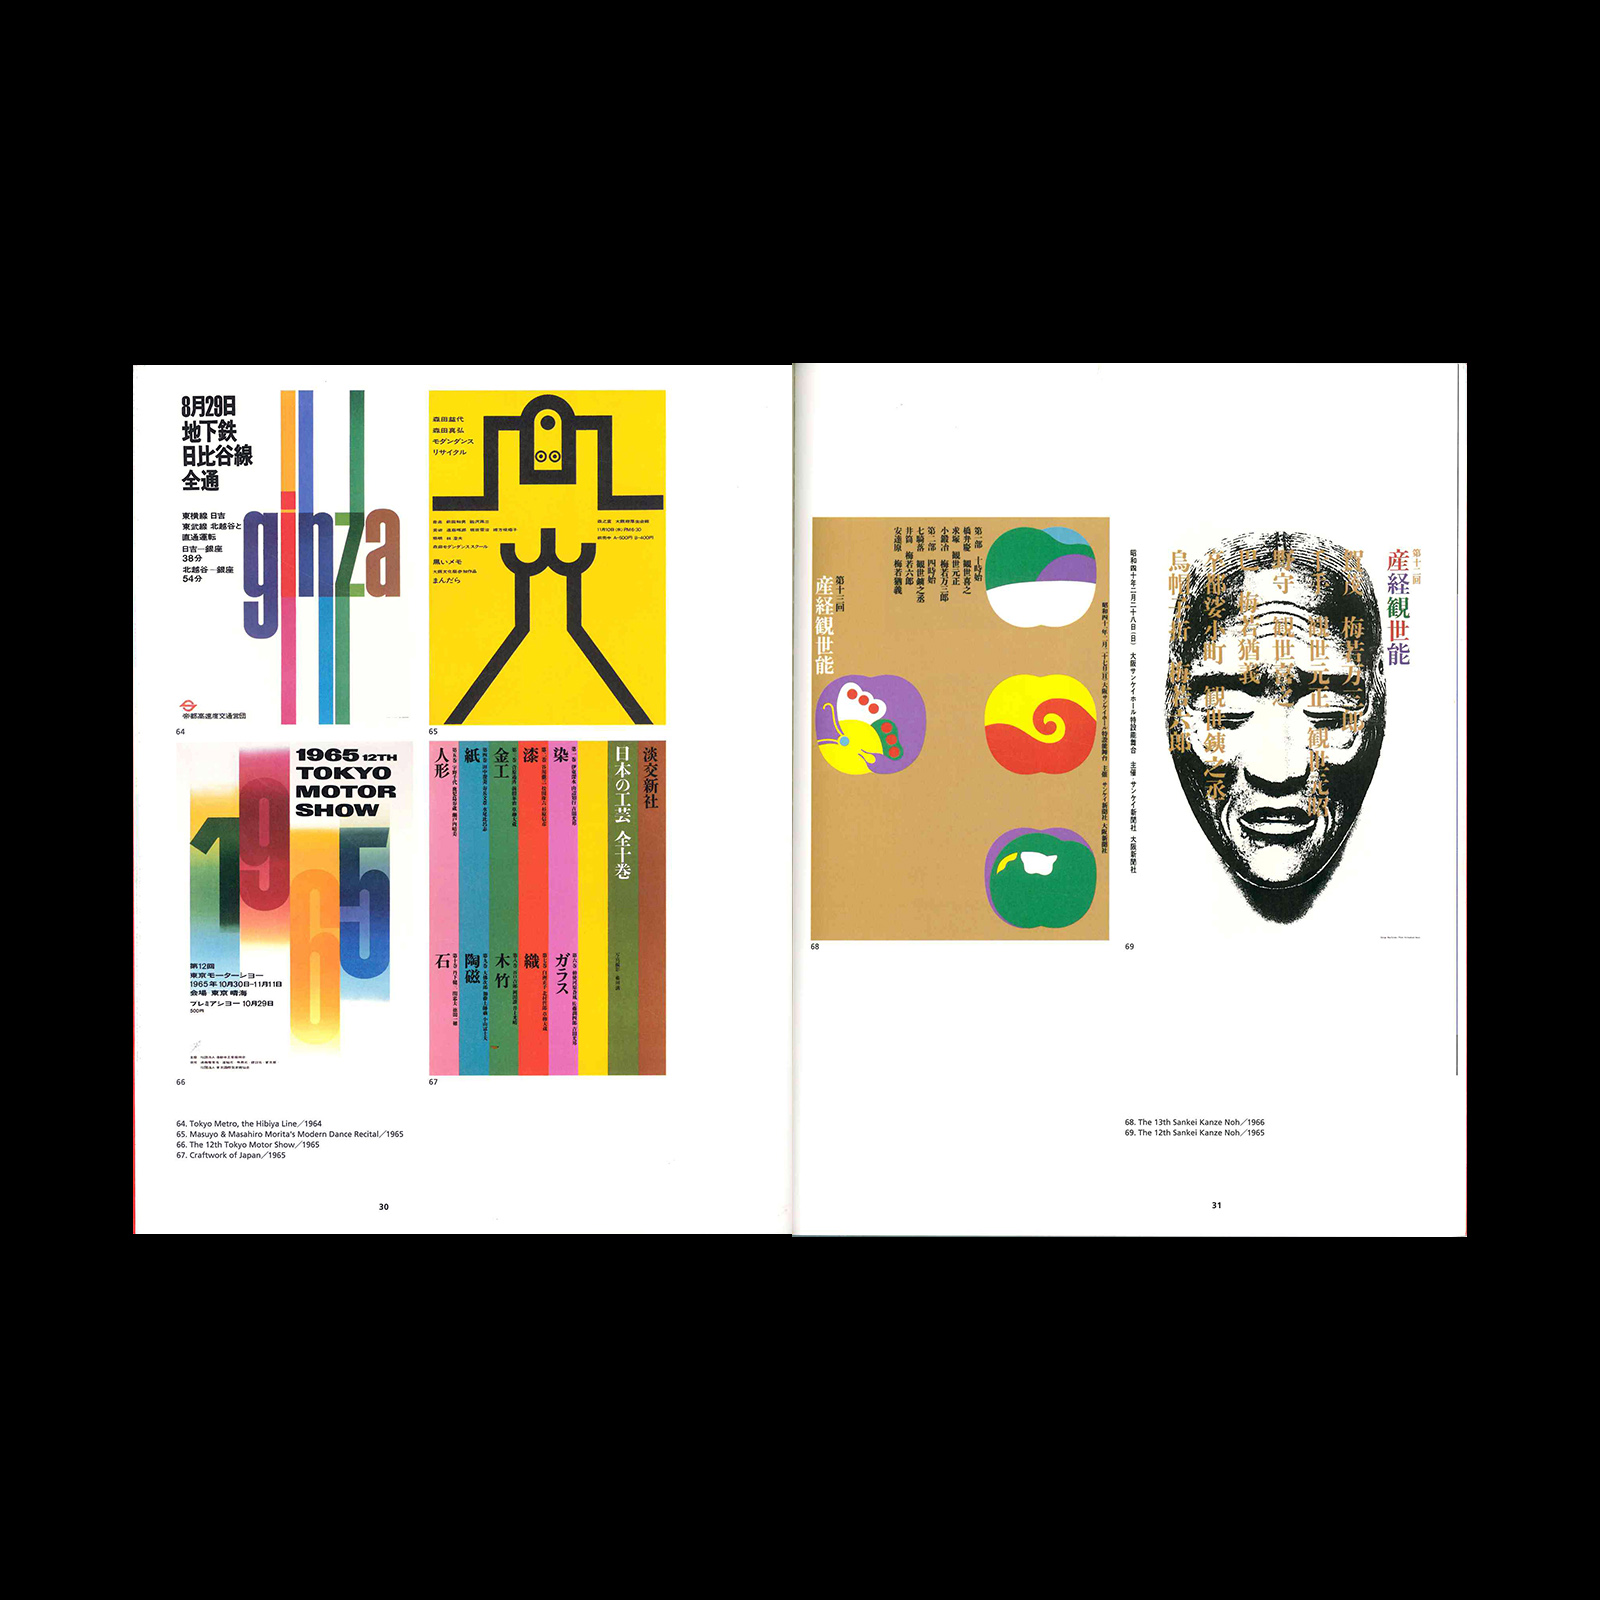 DNP Graphic Design Archives Collection II Ikko Tanaka Posters 1953-1979, 2010